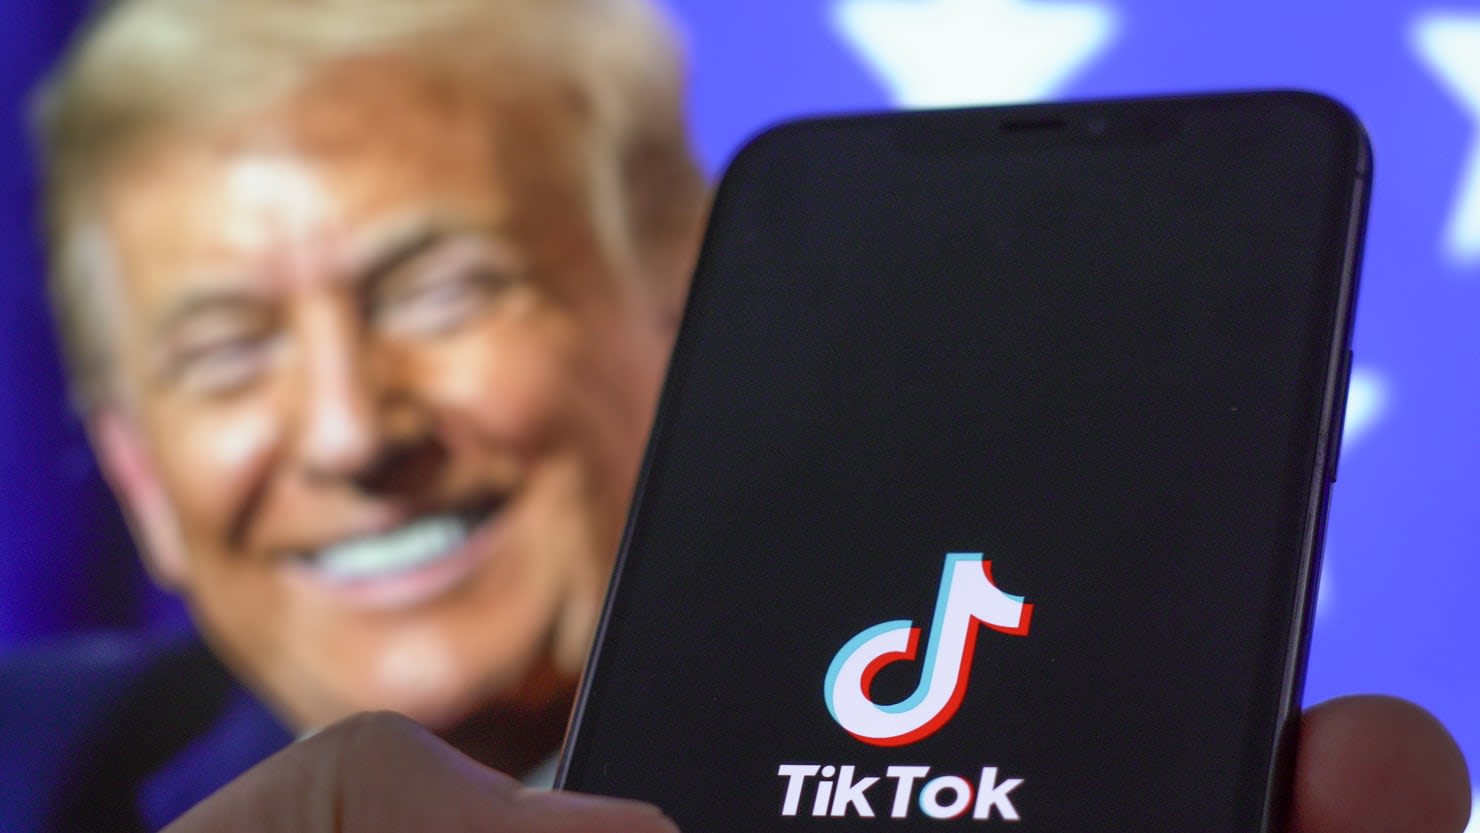 Trump Campaign Mulls Joining TikTok After Wanting to Ban It